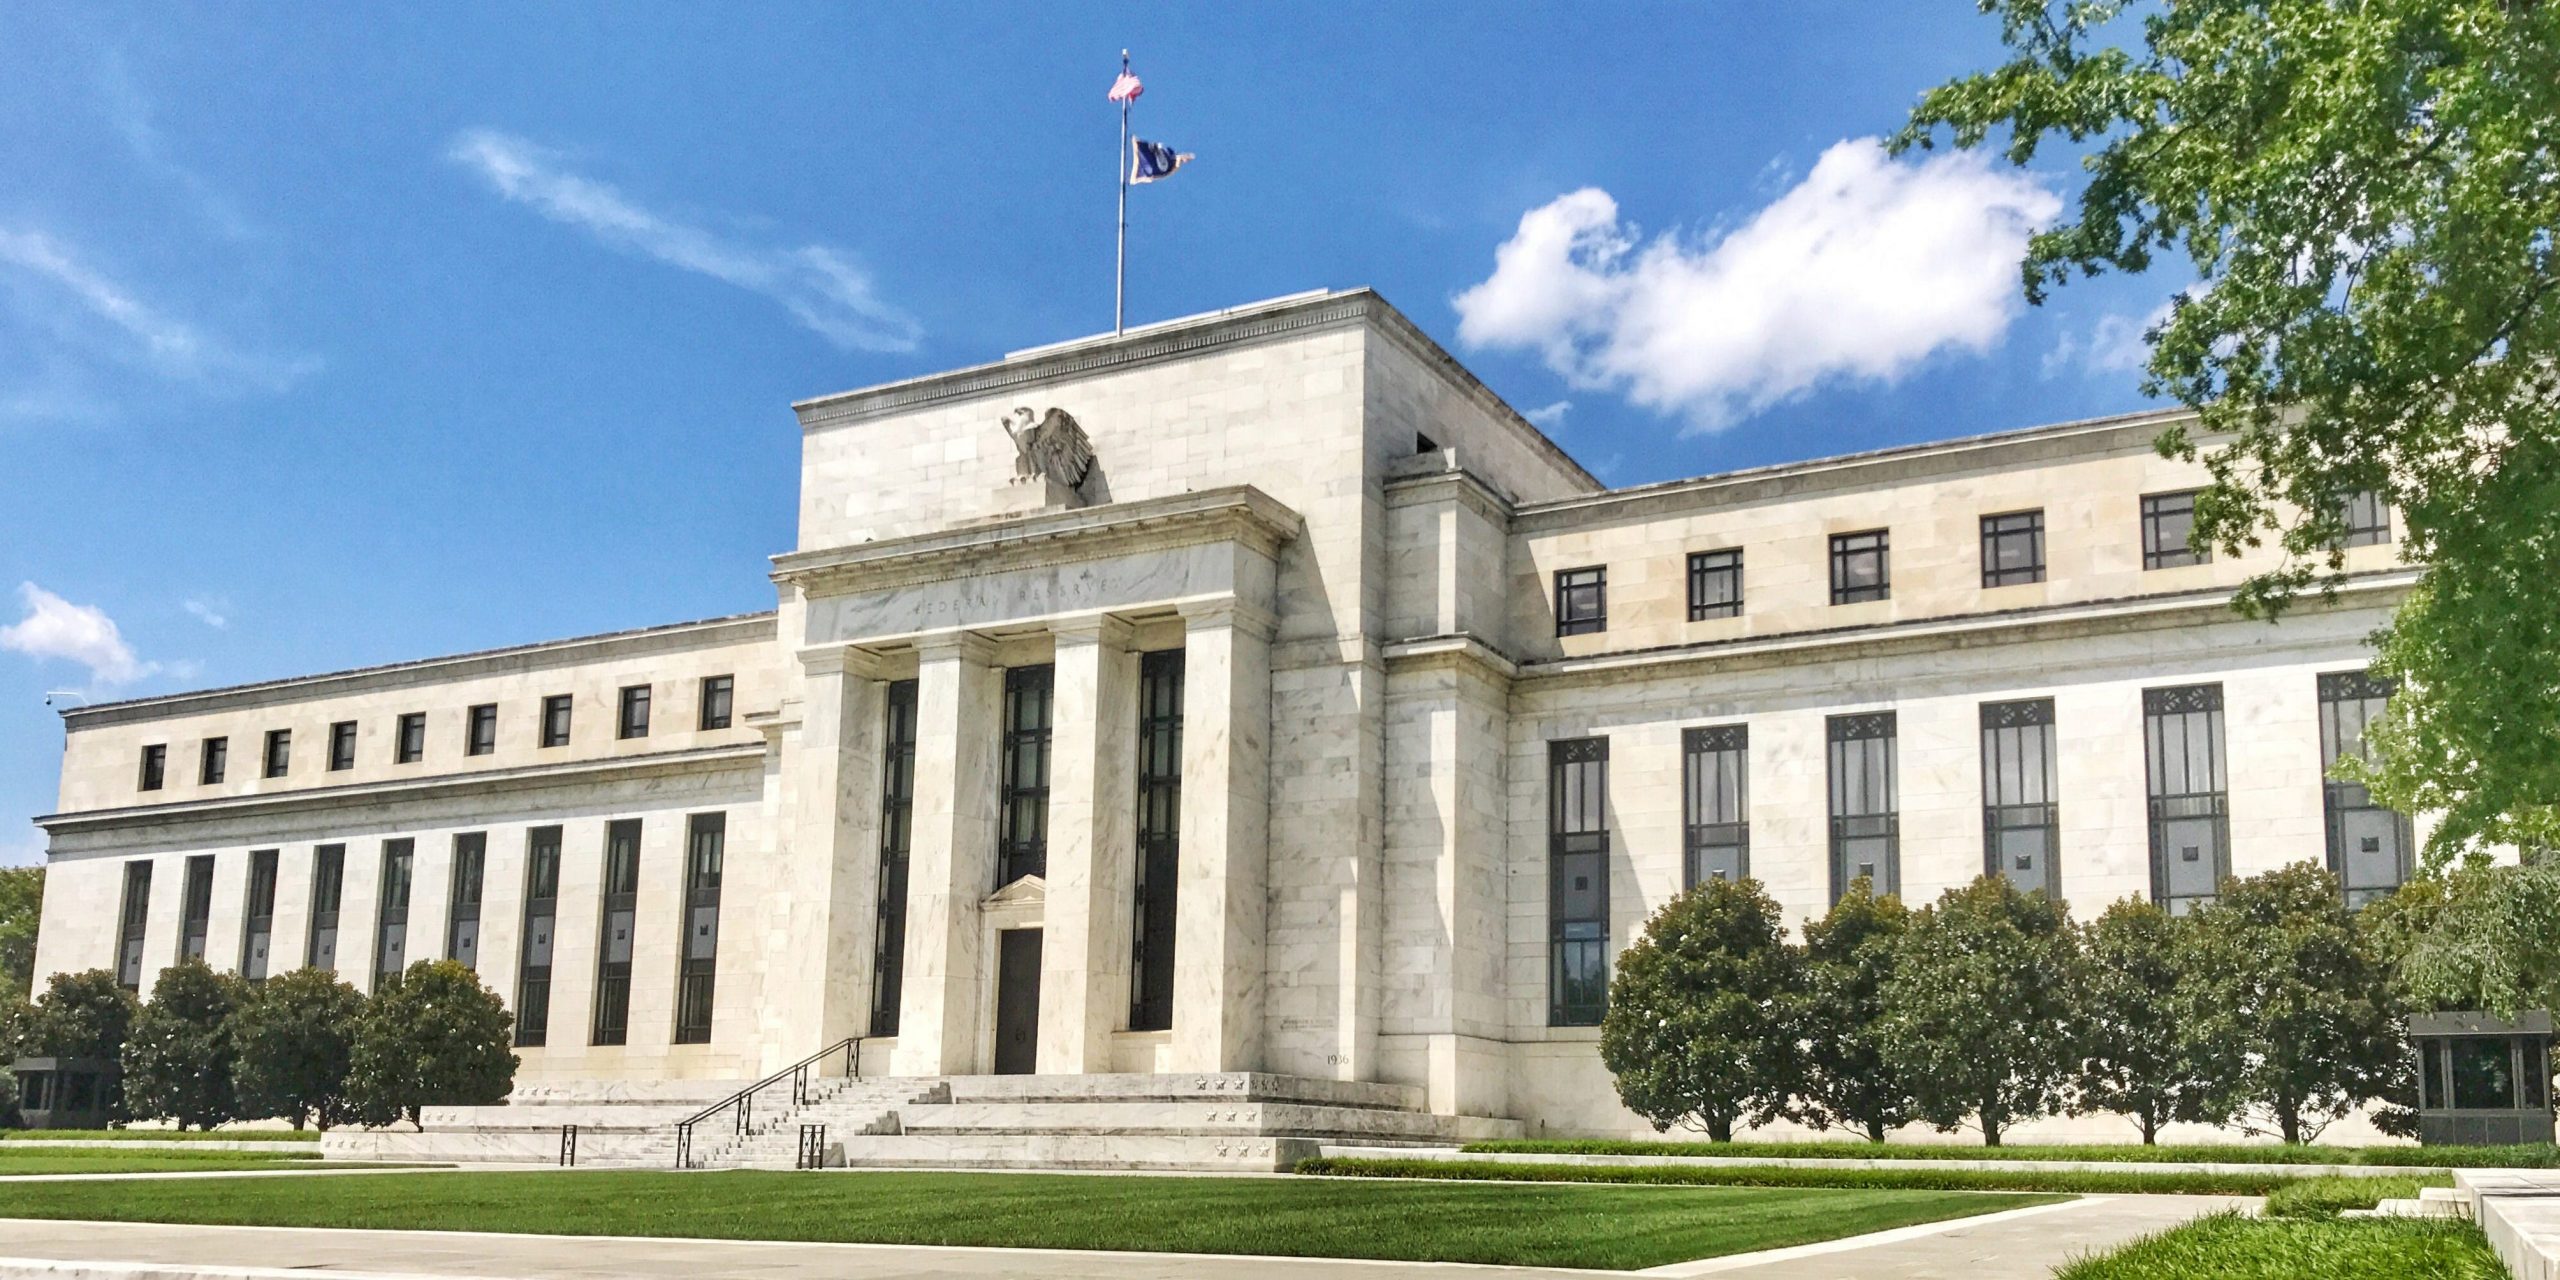 Facade of the Marriner S Eccles building of the United States Federal Reserve, on a bright and sunny day in Washington, DC, United States, July 24, 2017.